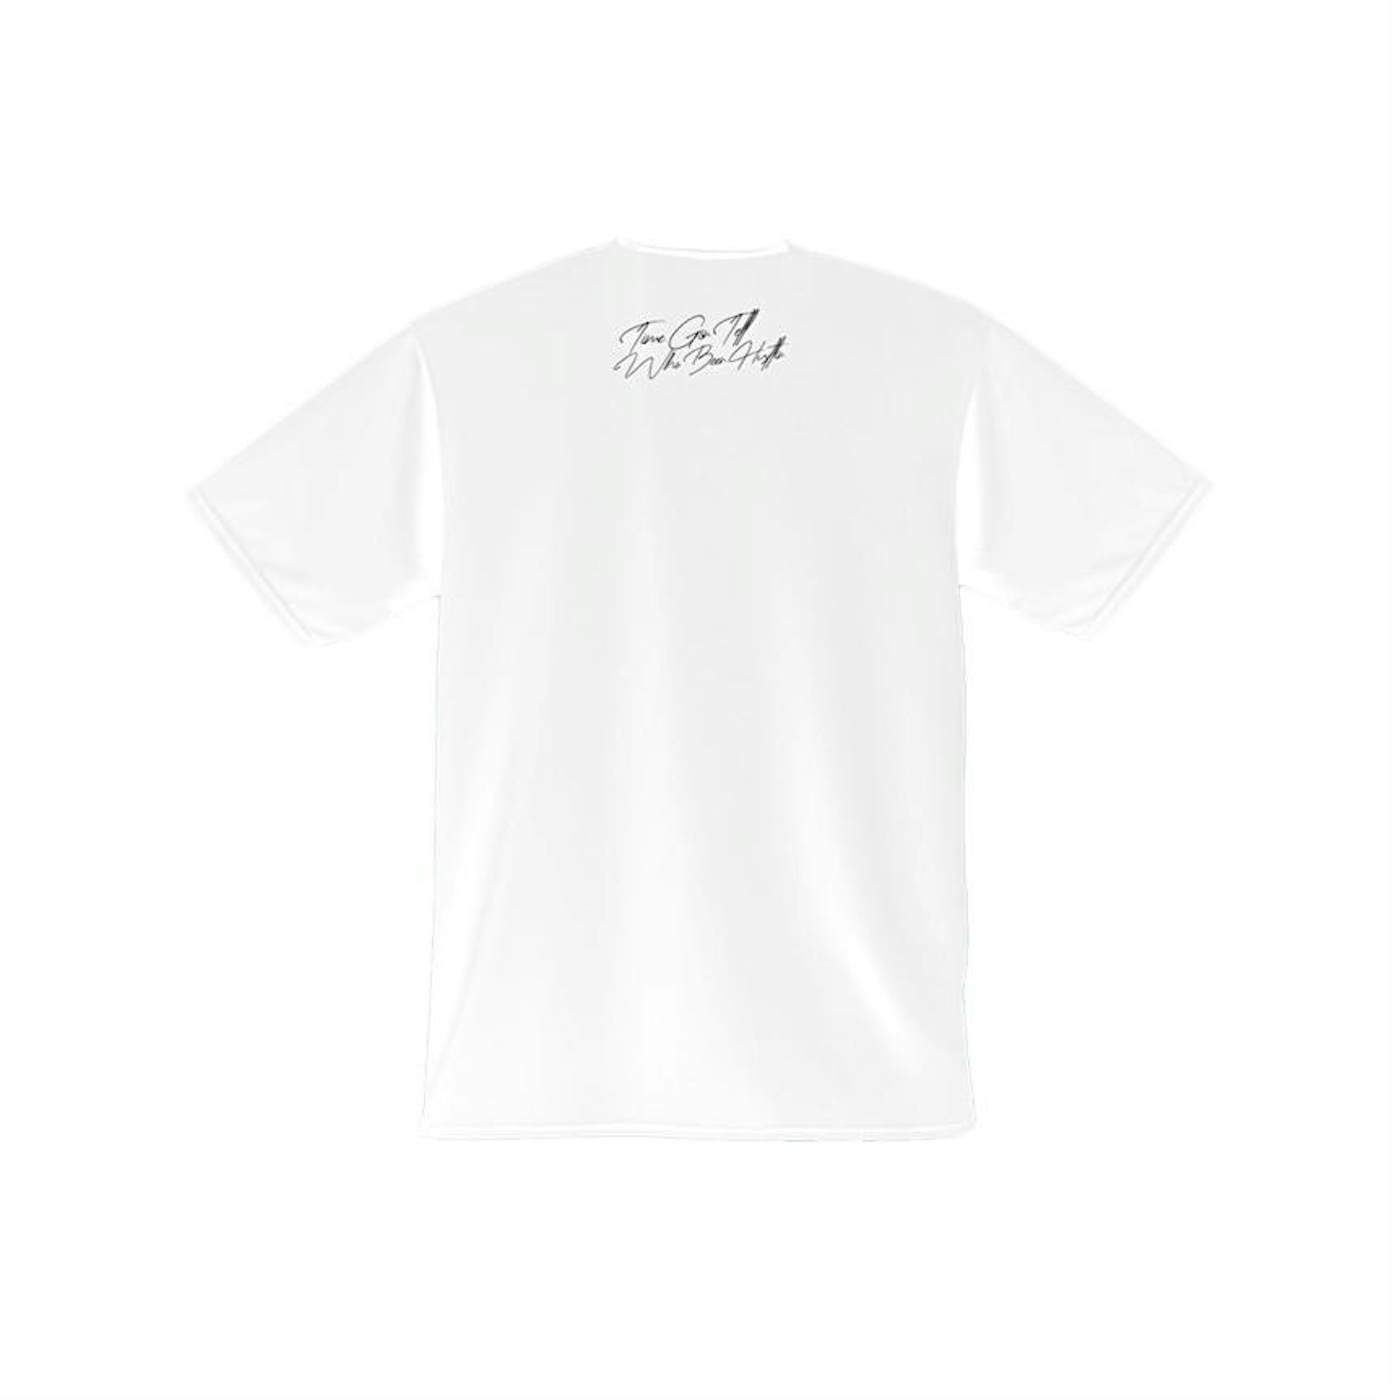 Taylor J Time Gon Tell Who Been Hustlin Artwork Tee (White)